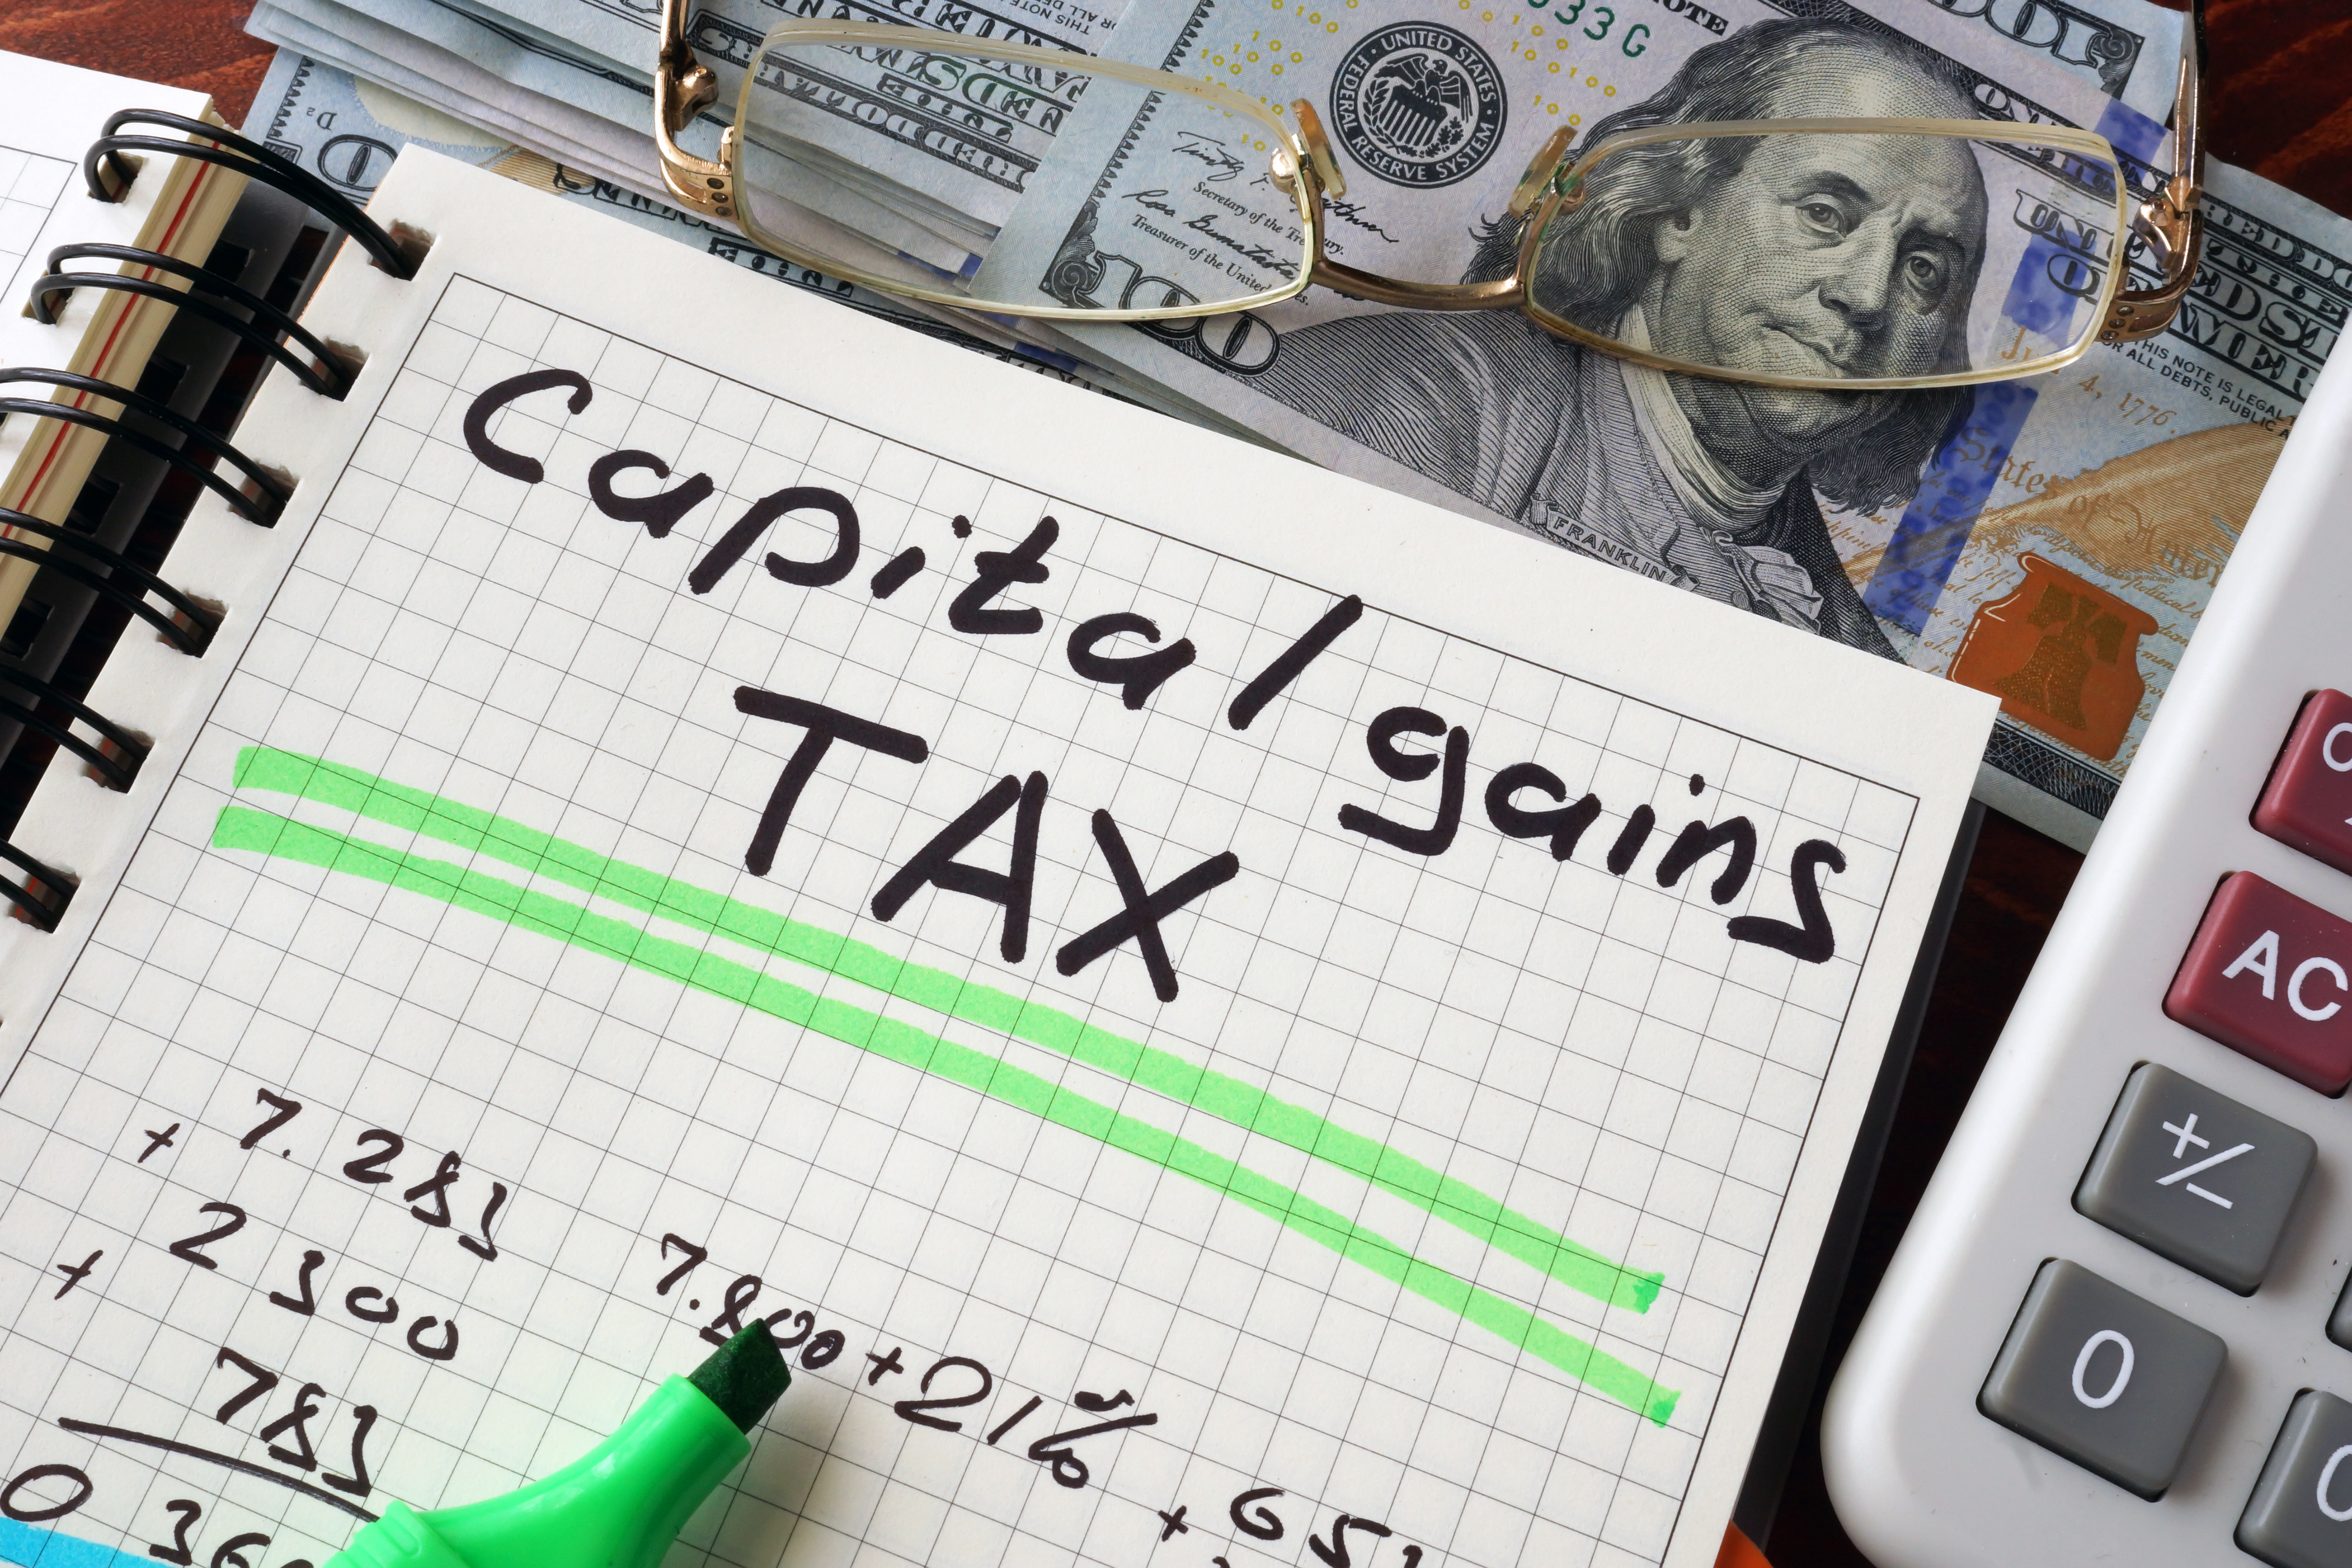 What are capital gains taxes and how could they be reformed?